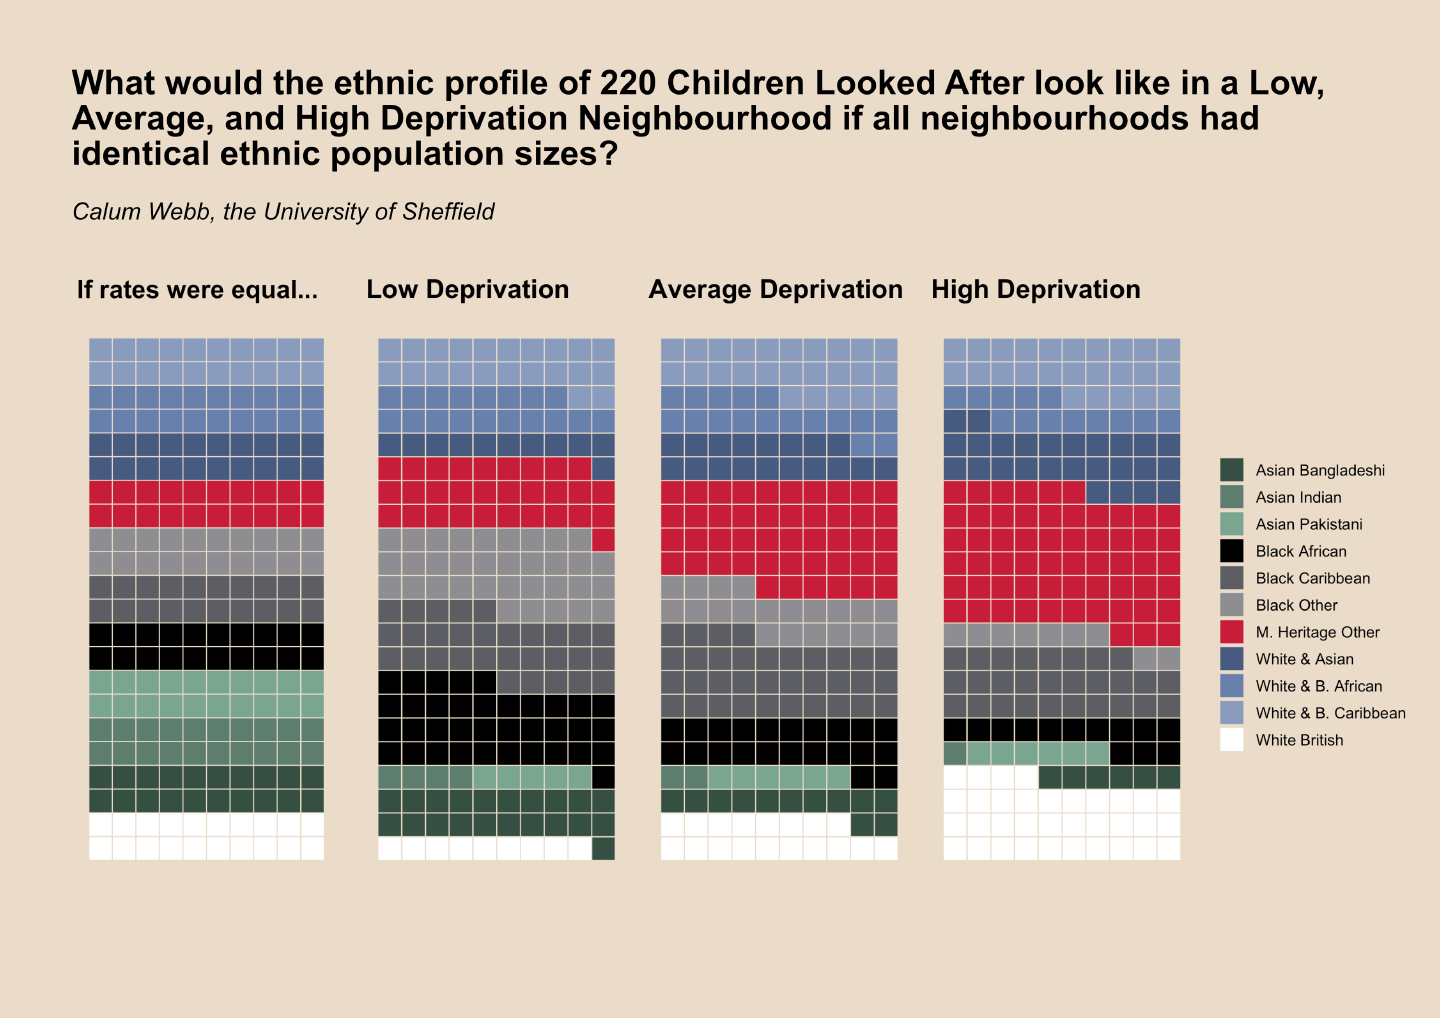 Intersectional (Ethnicity x Deprivation) Inequalities in Child Welfare